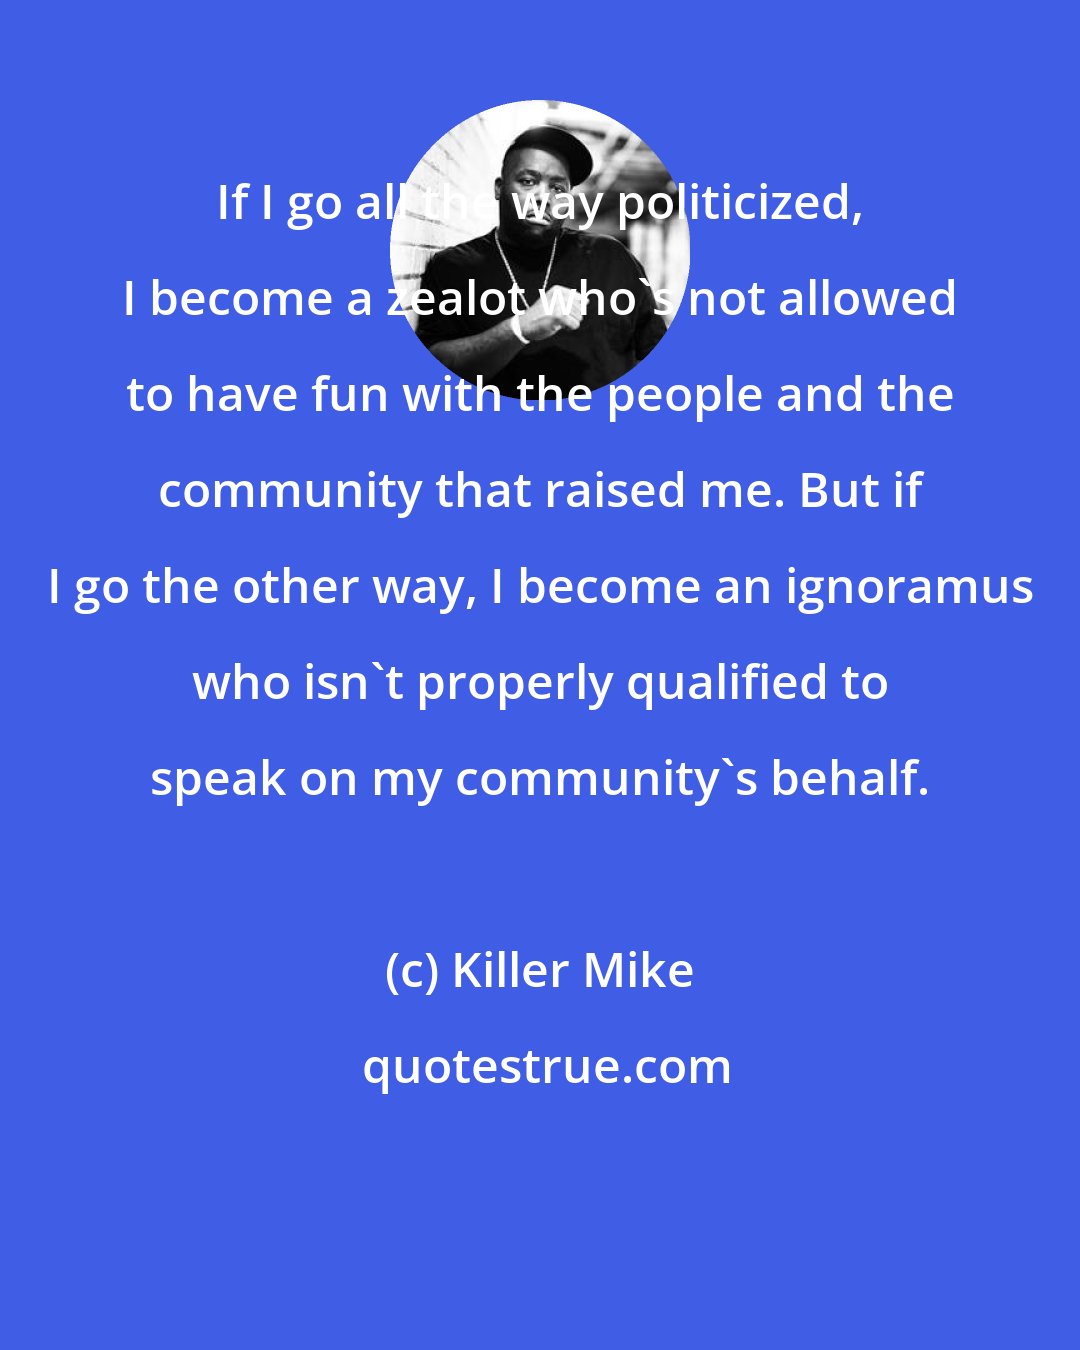 Killer Mike: If I go all the way politicized, I become a zealot who's not allowed to have fun with the people and the community that raised me. But if I go the other way, I become an ignoramus who isn't properly qualified to speak on my community's behalf.